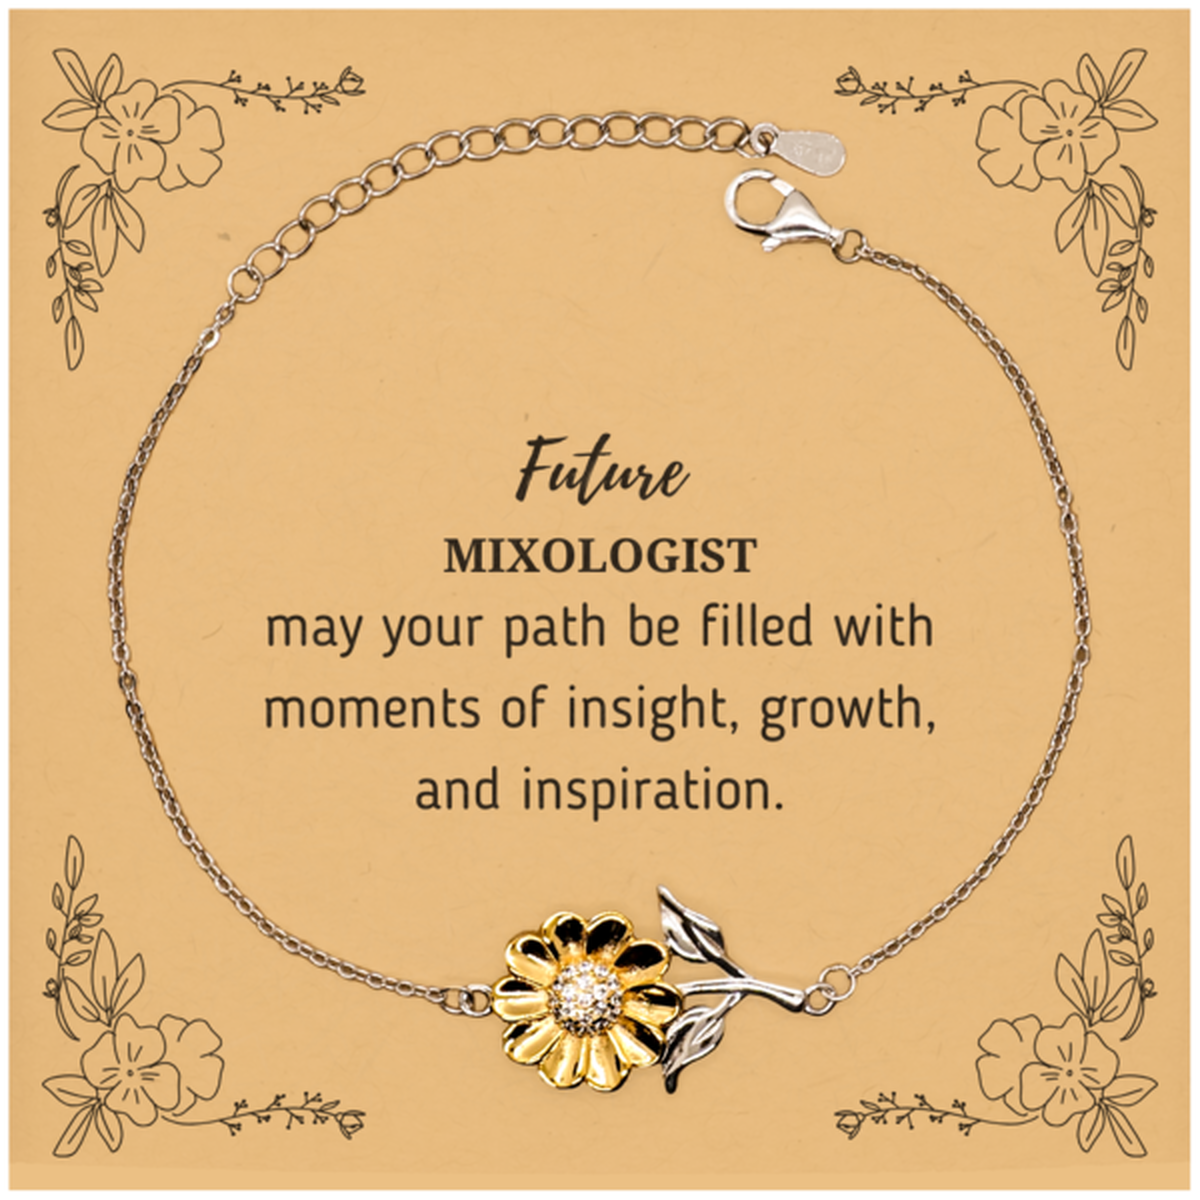 Future Mixologist Gifts, May your path be filled with moments of insight, Graduation Gifts for New Mixologist, Christmas Unique Sunflower Bracelet For Men, Women, Friends